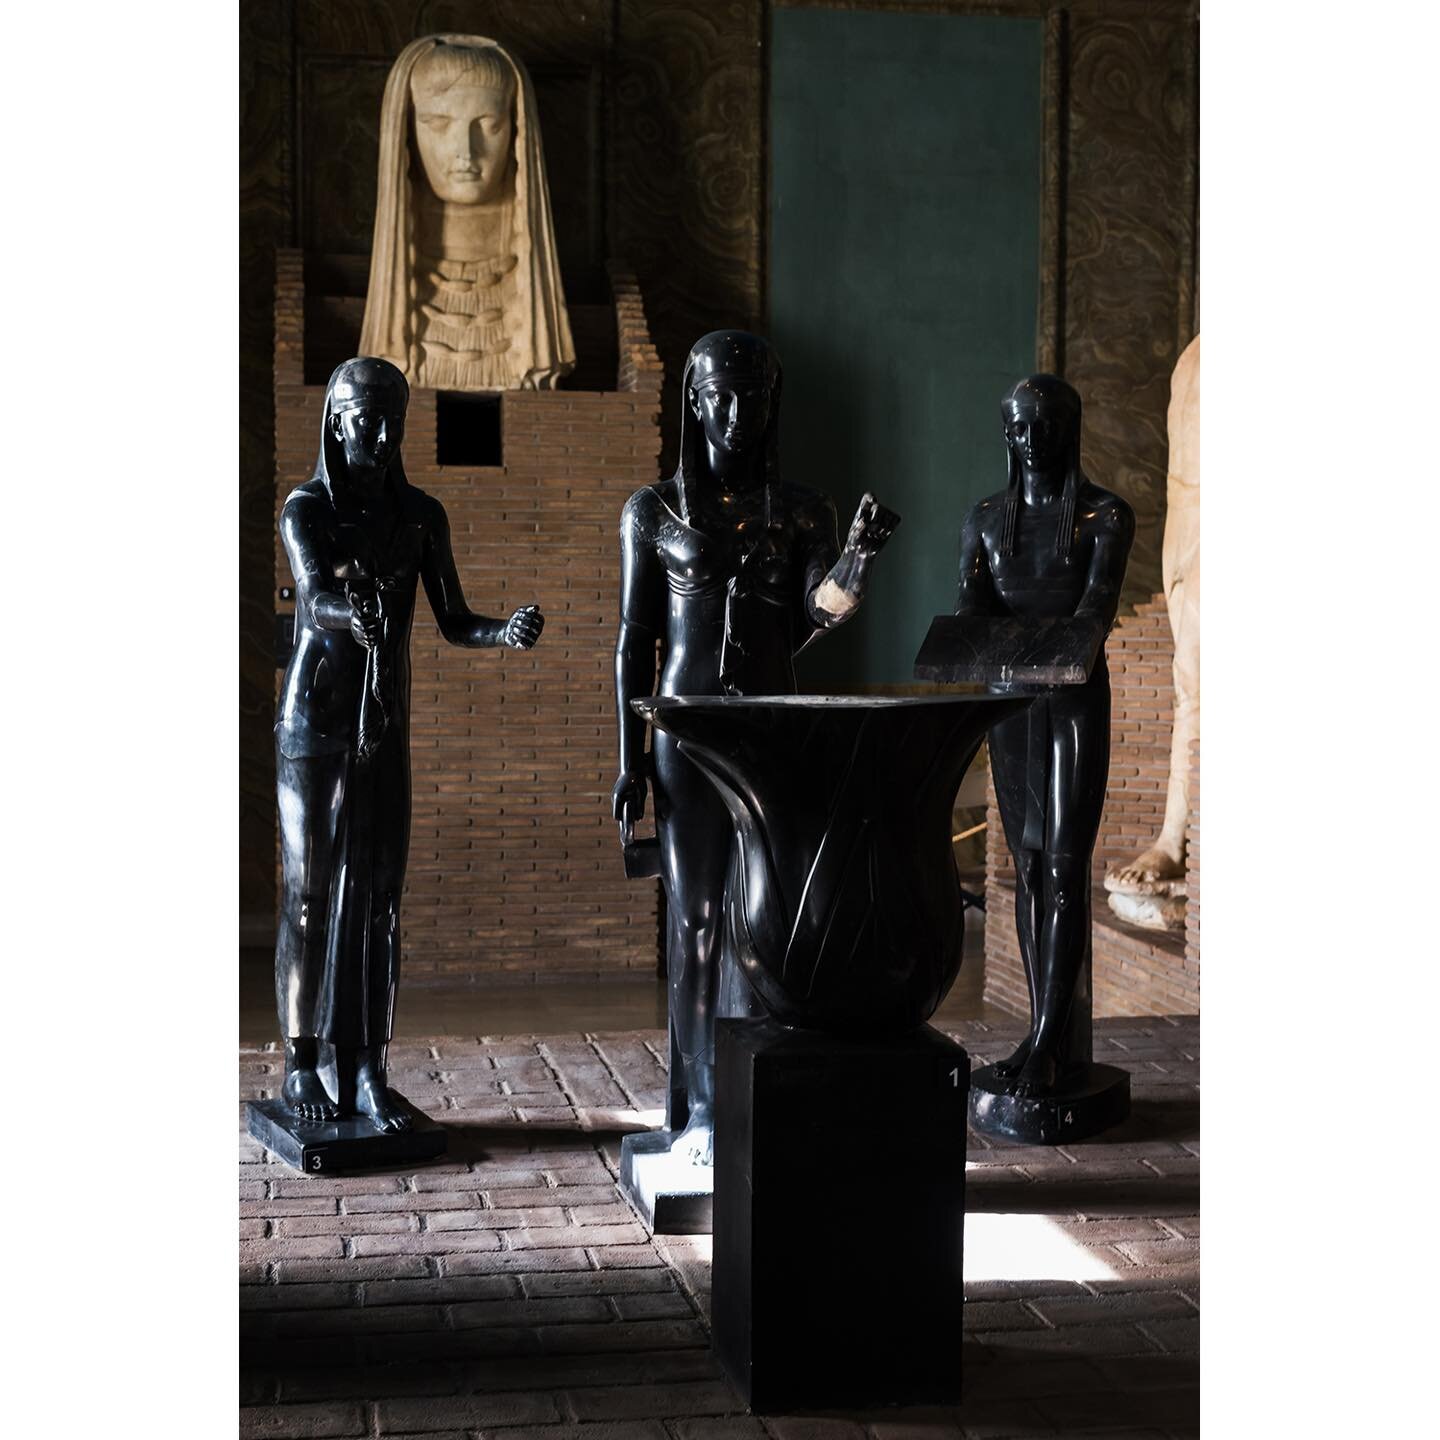 Egyptian Statues in the Vatican Museum - Rome
.
.
#Rome #Vaticanmuseum #Egyptianstatues #Romechurches #Egyptianstatue #lightandshadow #visitRome #Egyptantique #ancientRome #Egyptology #Egyptianrelics #egyptianmuseum #Romephotography #picoftheday #pho